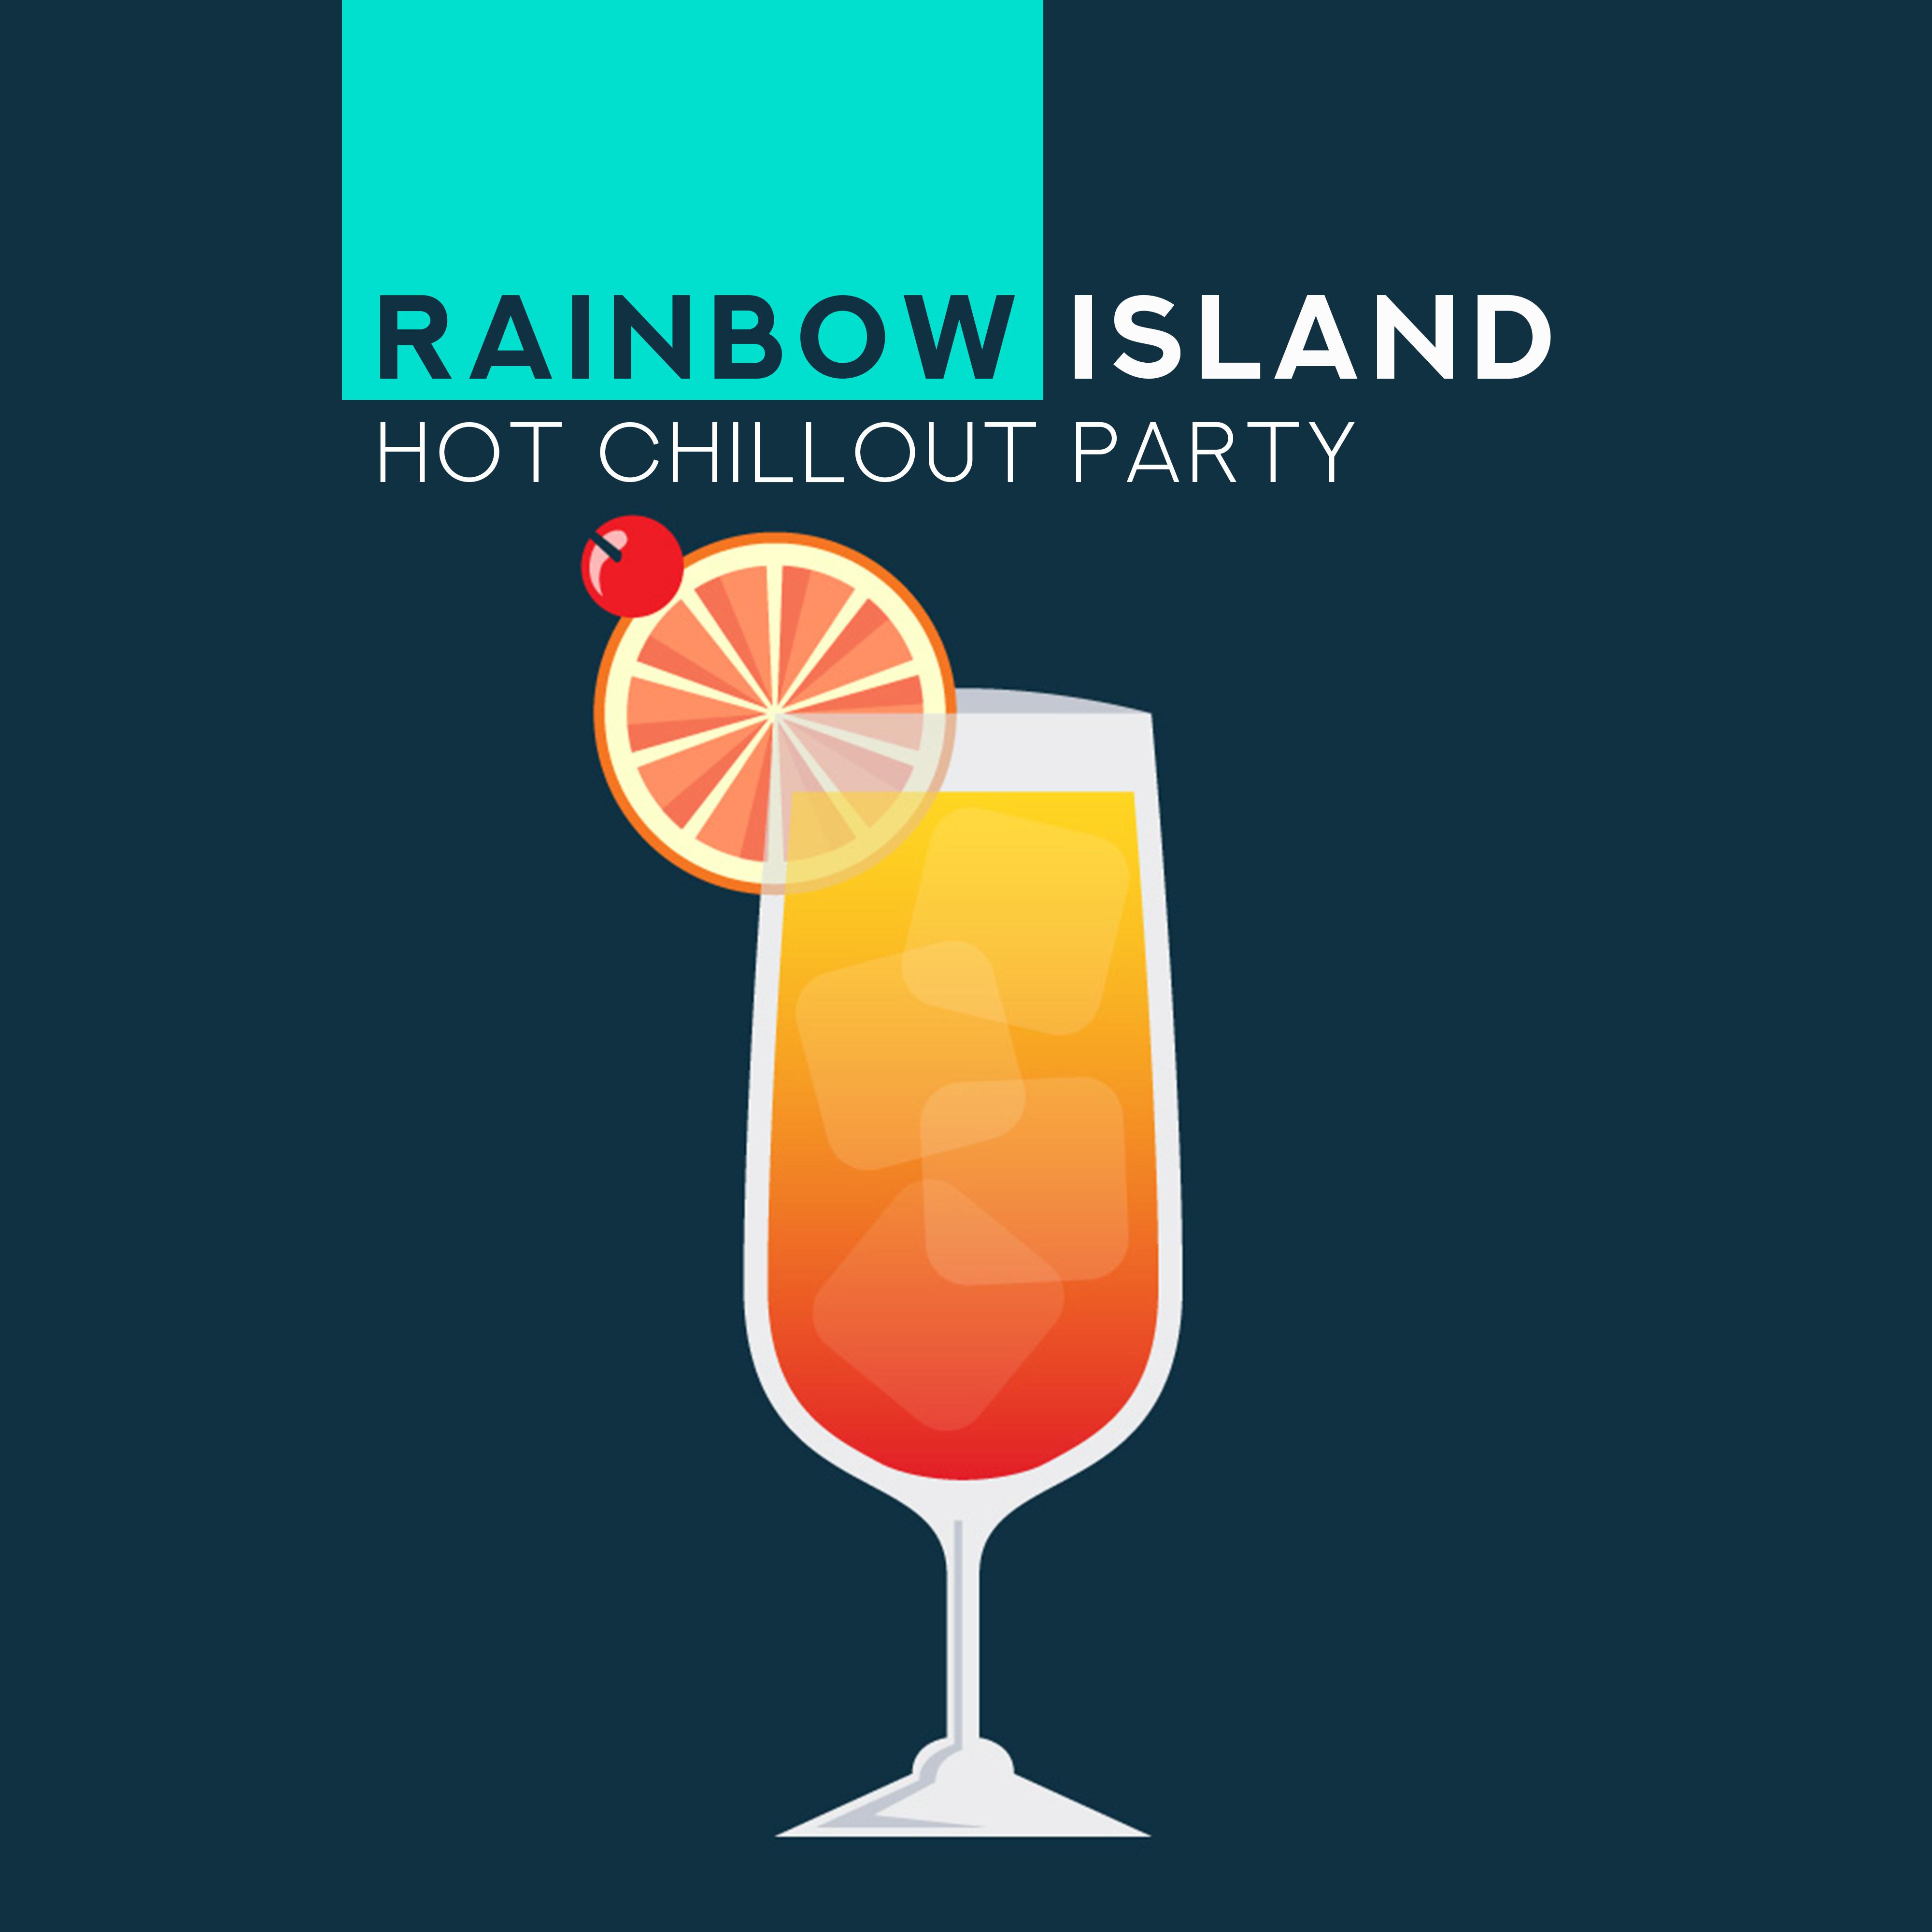 Rainbow Island Hot Chillout Party: Mix of Best 2019 Chill Out Music for Dance Party, Ultimate Disco Set, Electronic Slow Beats